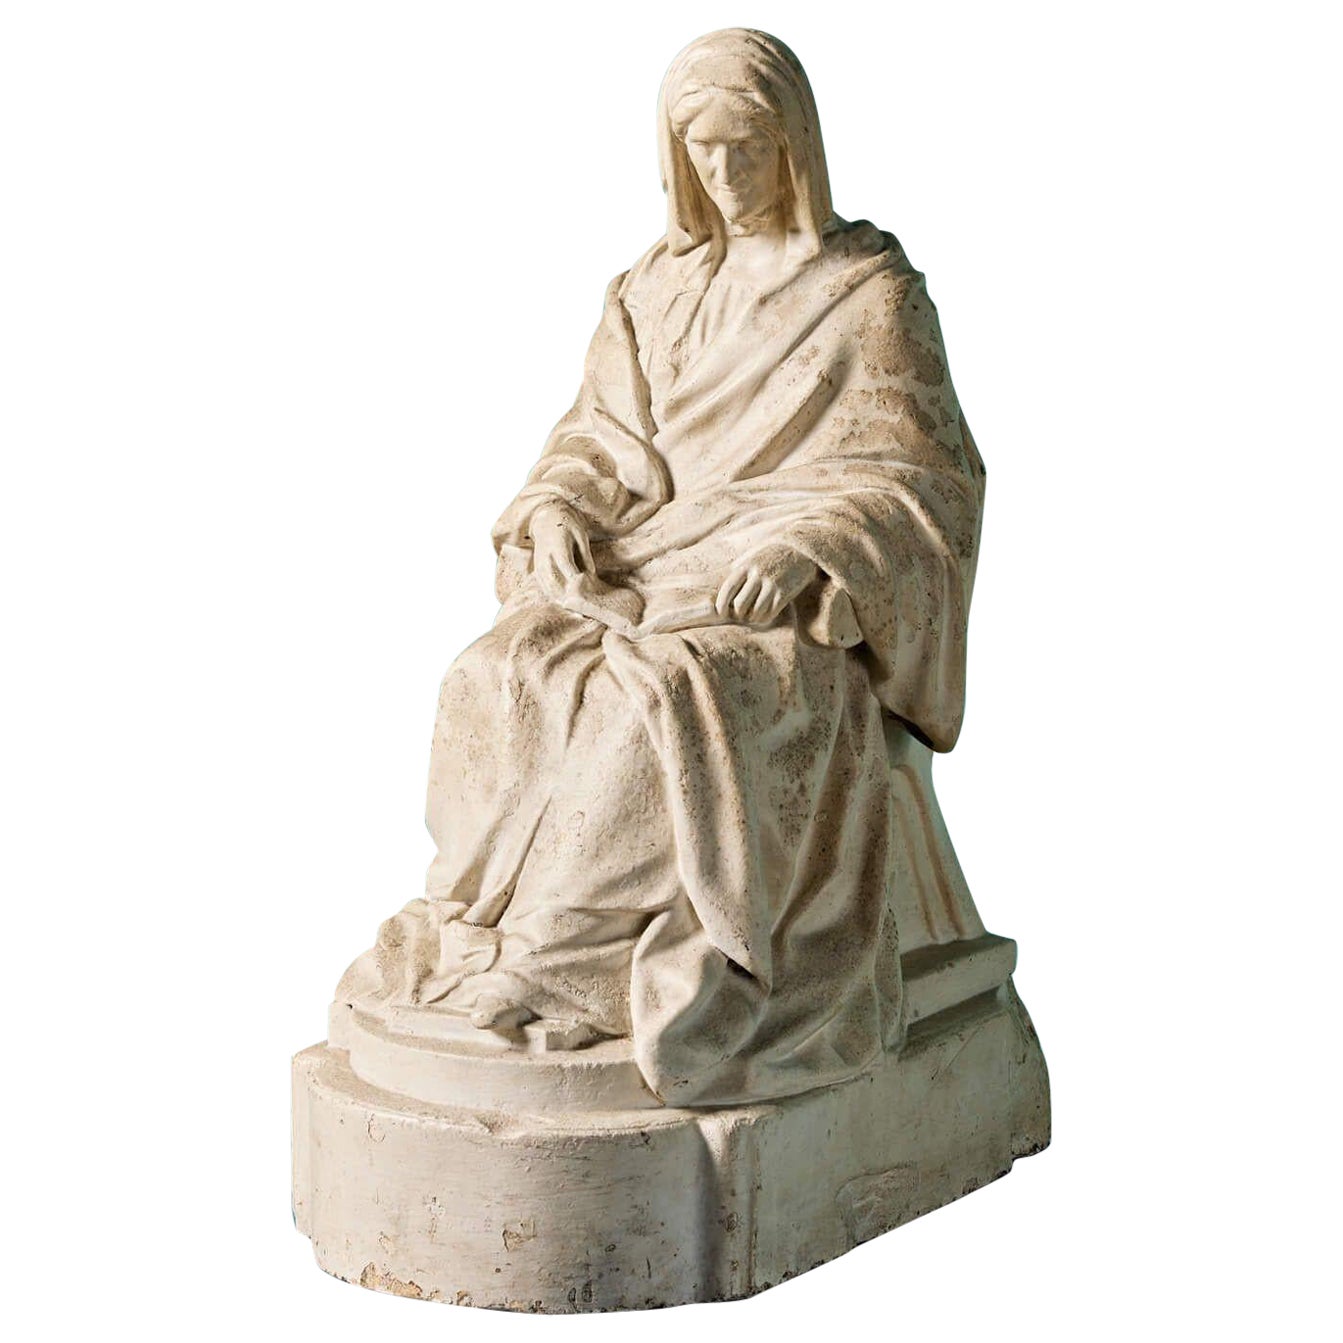 Plaster Maquette of a Seated Lady